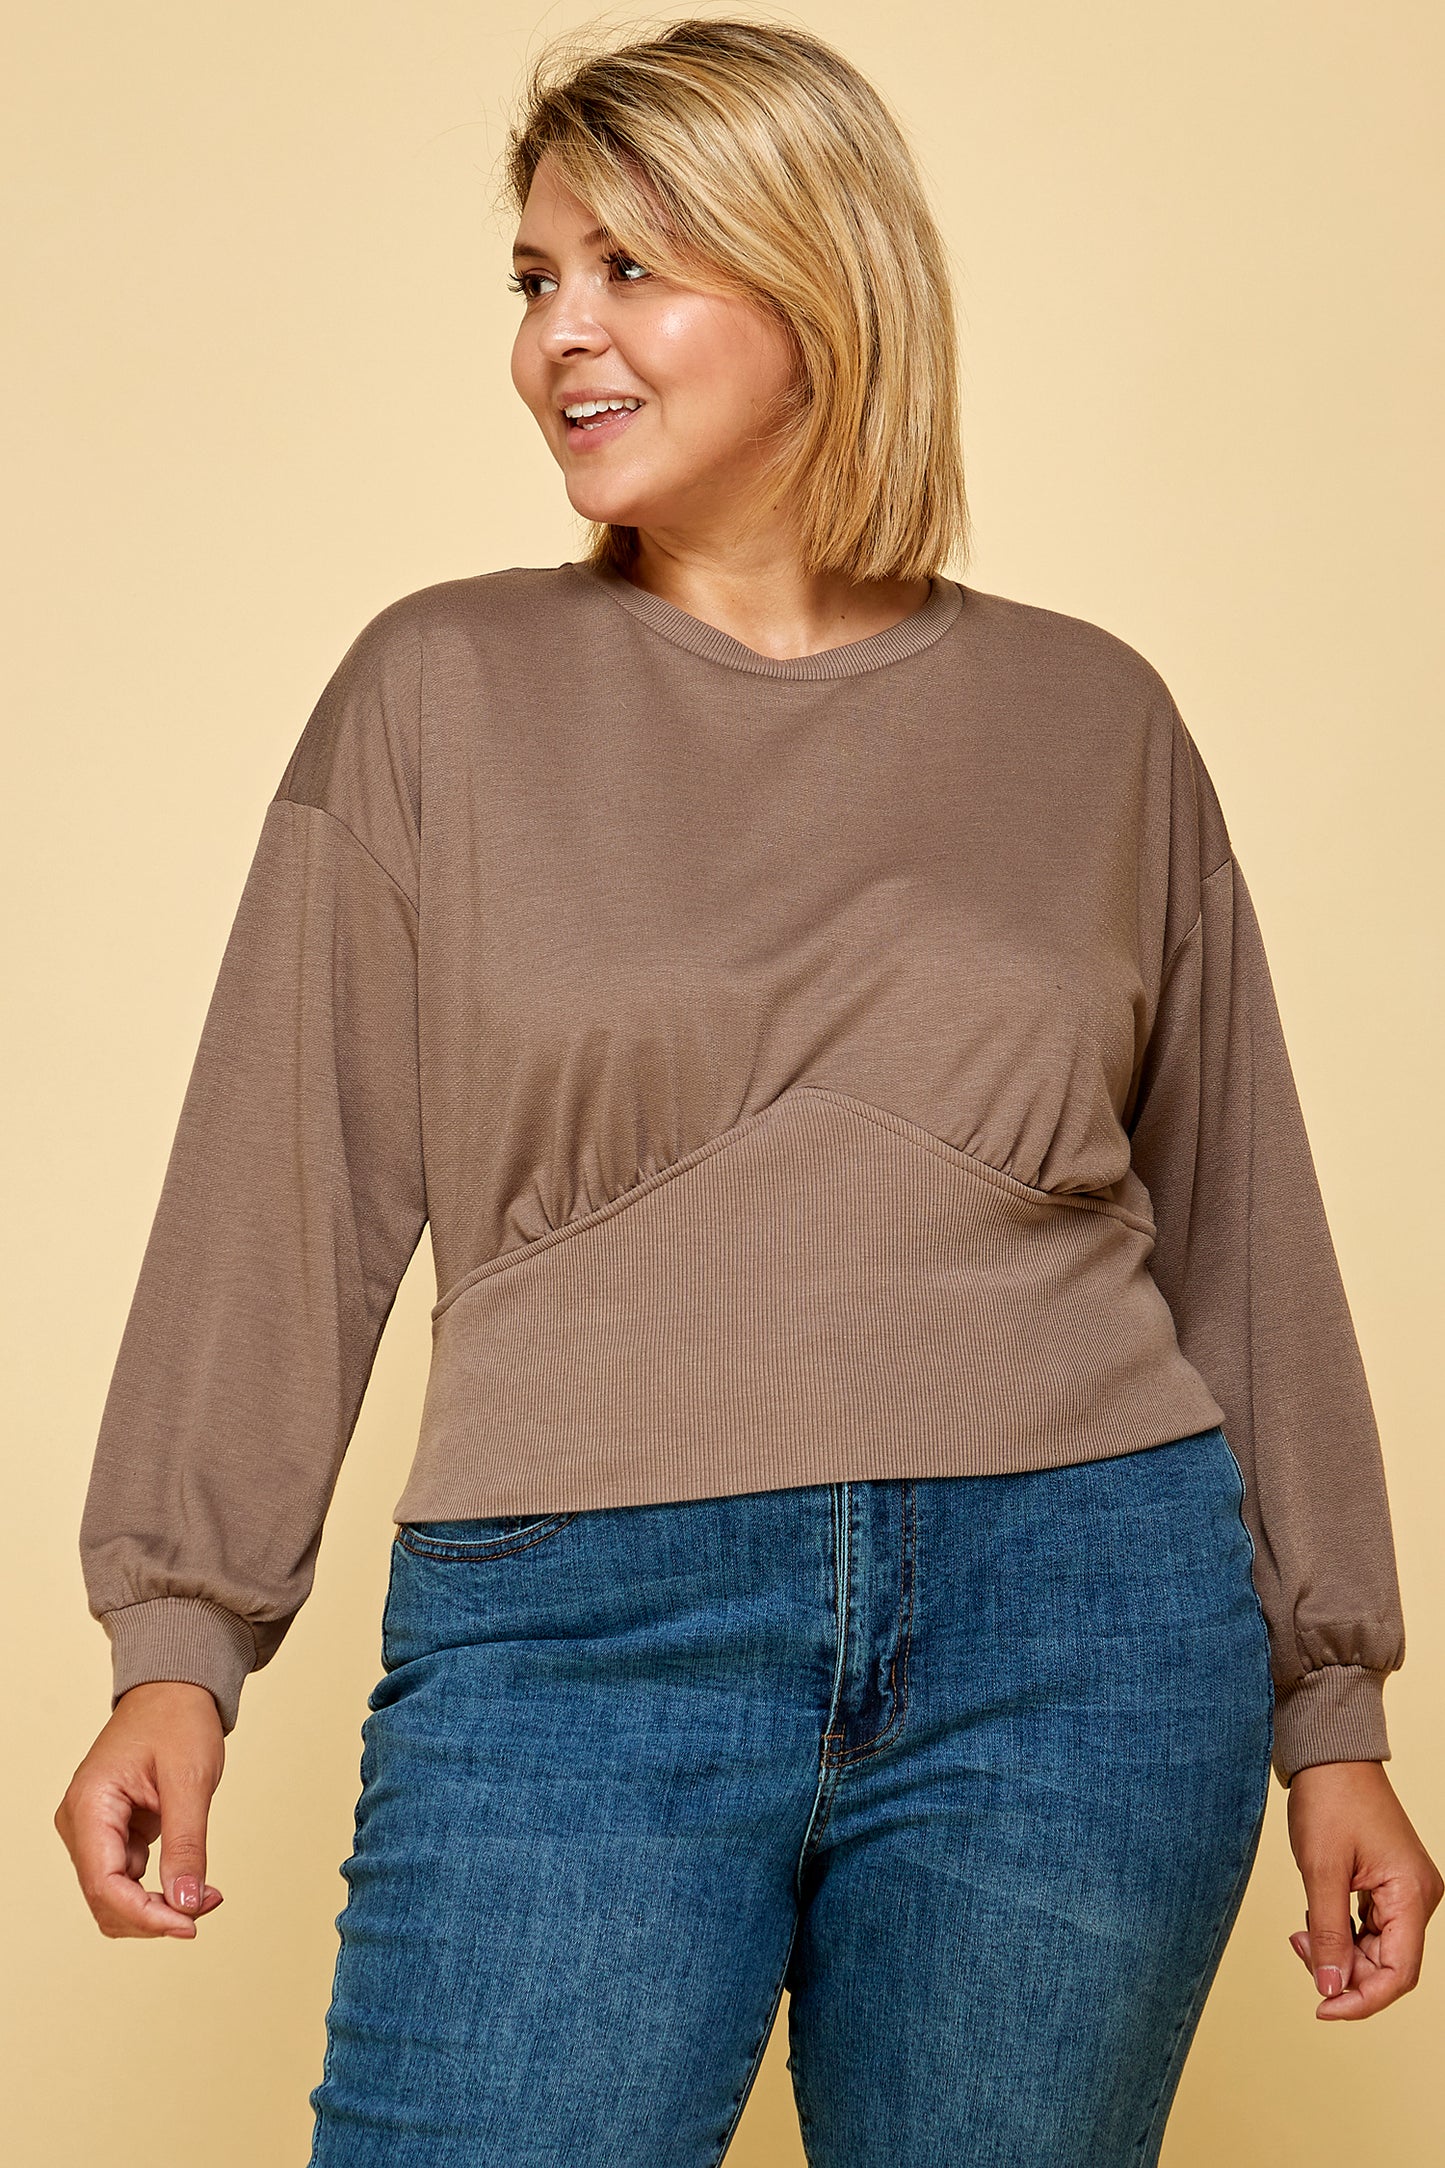 CREW NECK SWEATER IN TAUPE